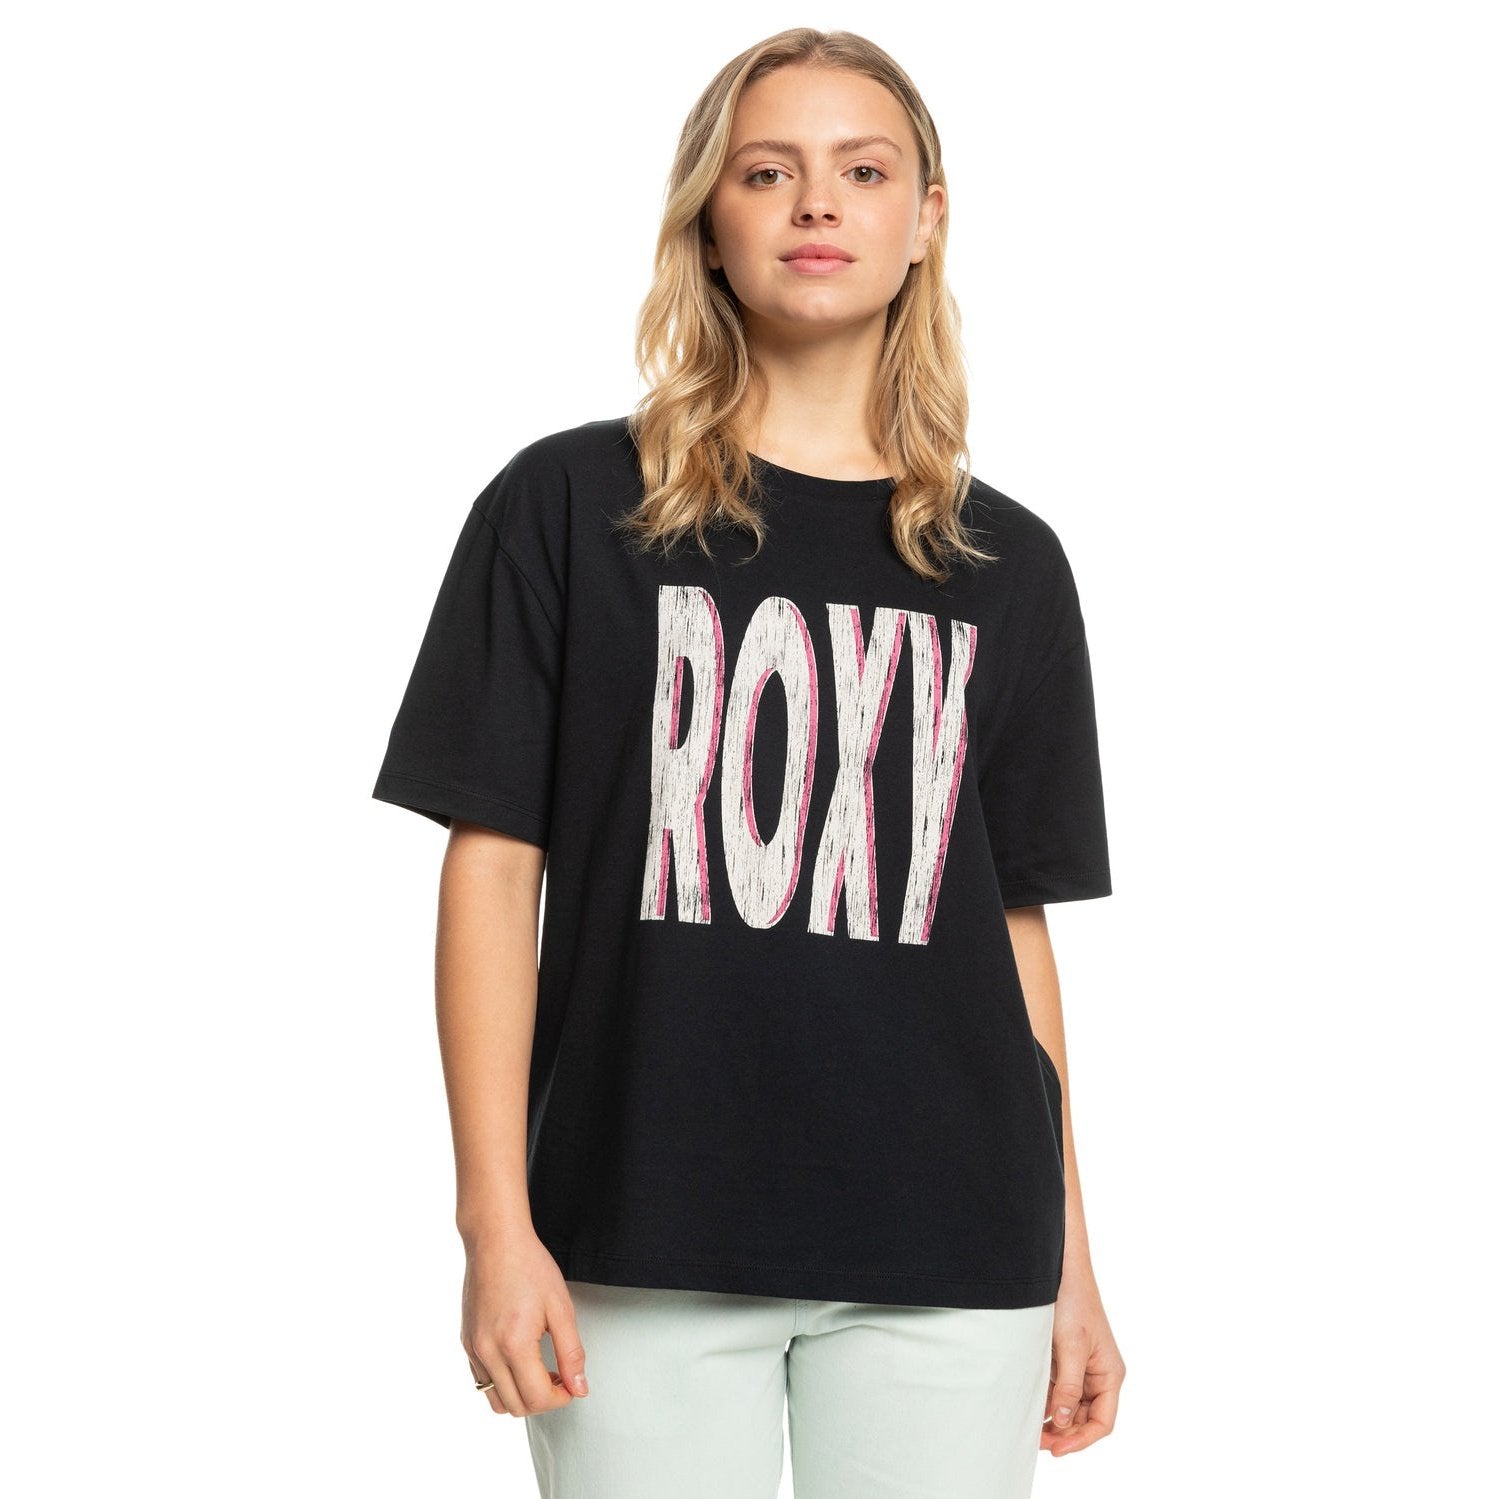 ManGo Sky The T-Shirt – Roxy Surfing Anthracite - Under Womens Sand